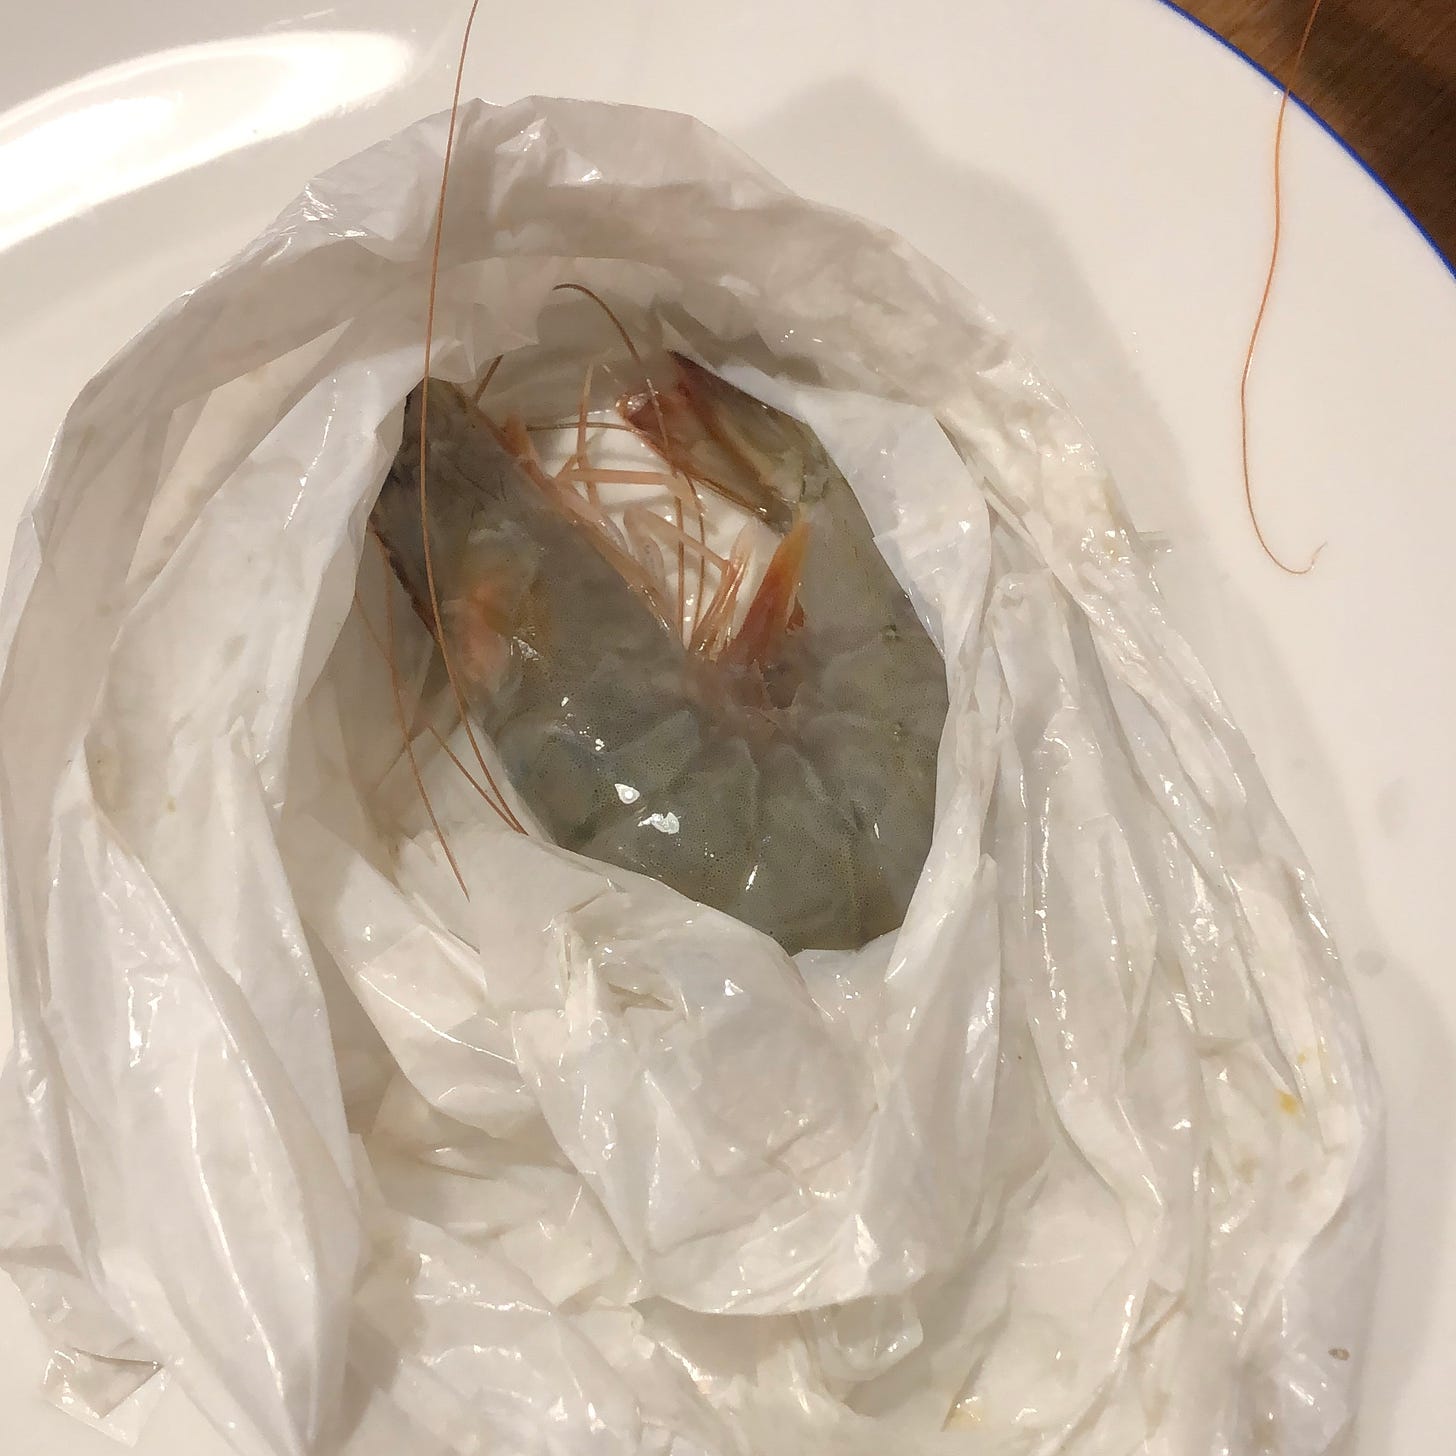 A wet glassy grey and pale pink raw prawn curled in the bottom of a ruffled white plastic bag. 